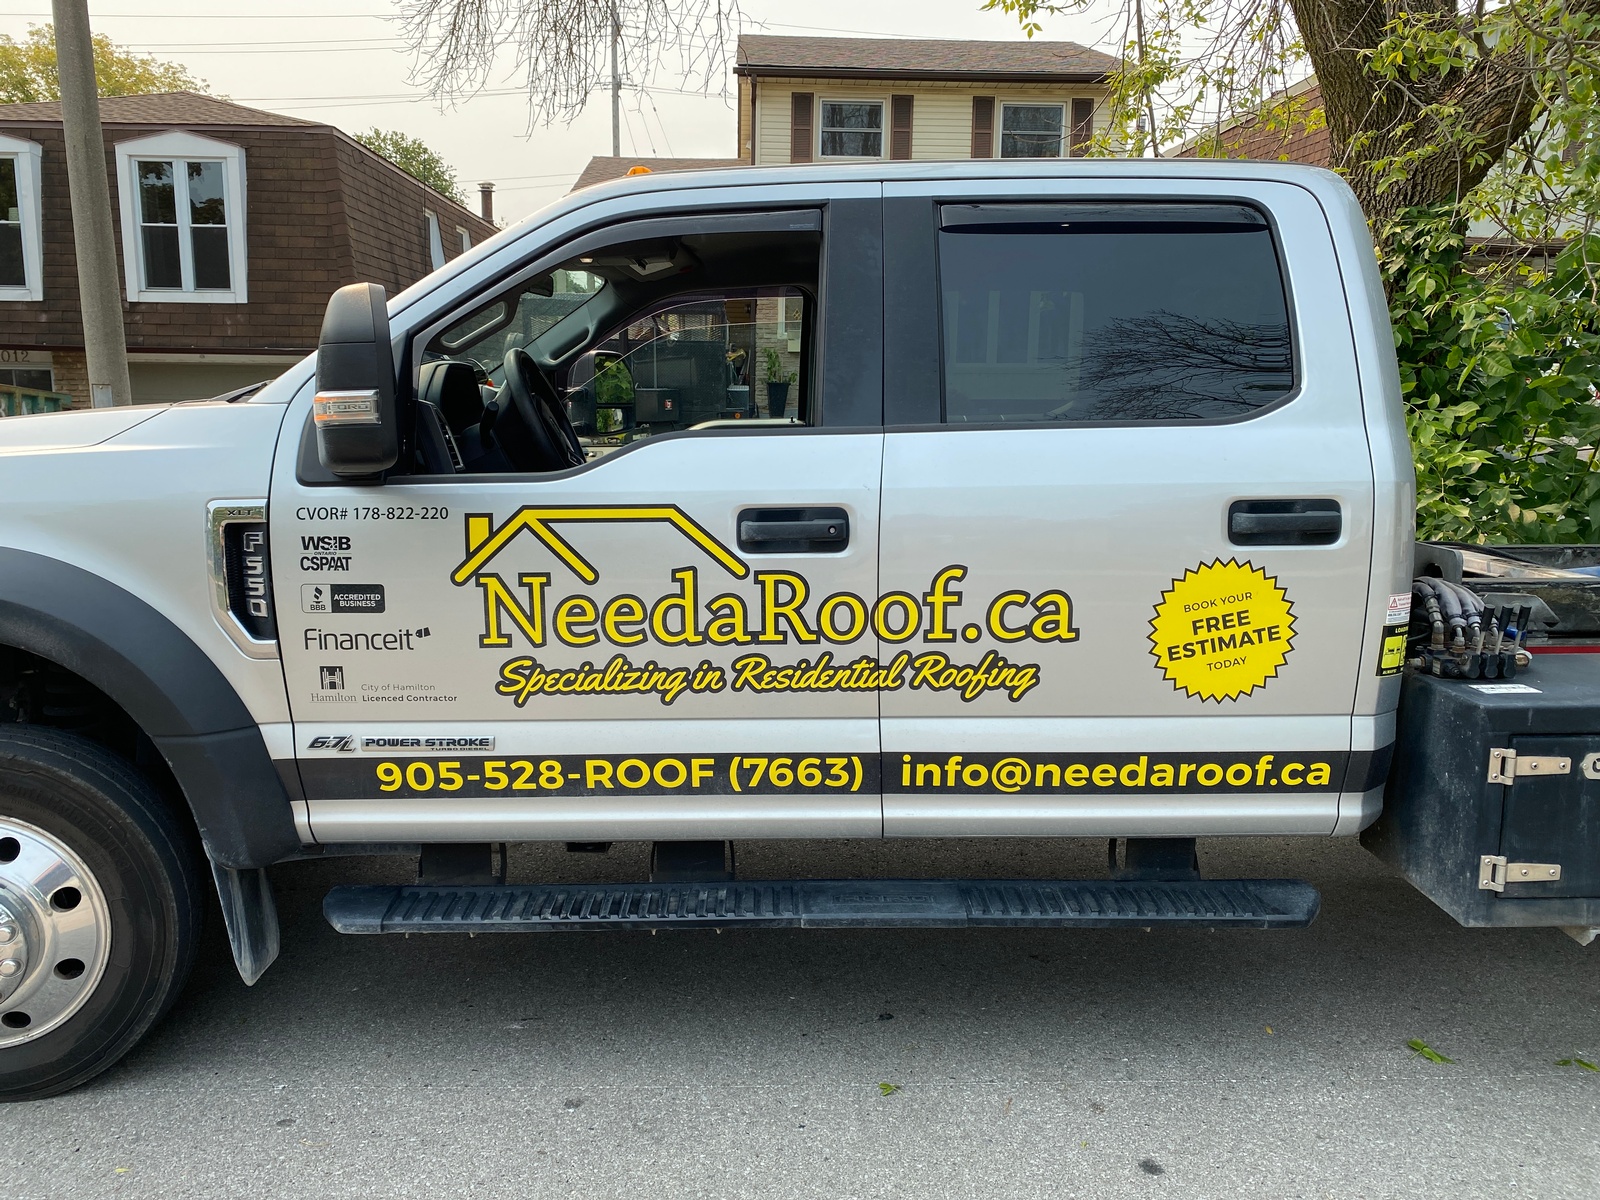 Residential Roofing services by Needaroof.ca (Ontario) INC - Hamilton Residential Roofing Company